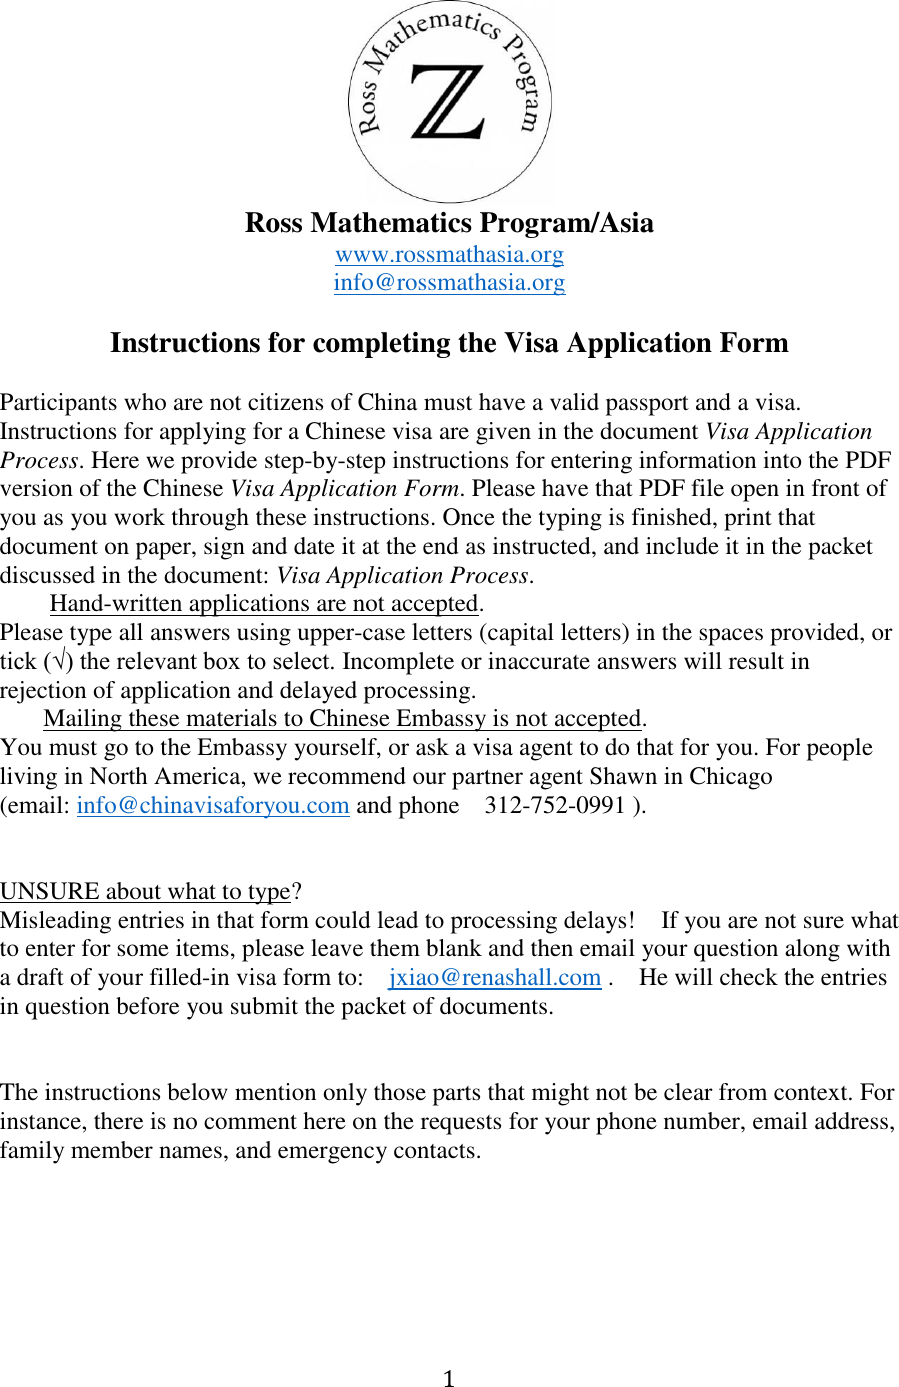 Page 1 of 3 - Instructions-for-visa-application-form